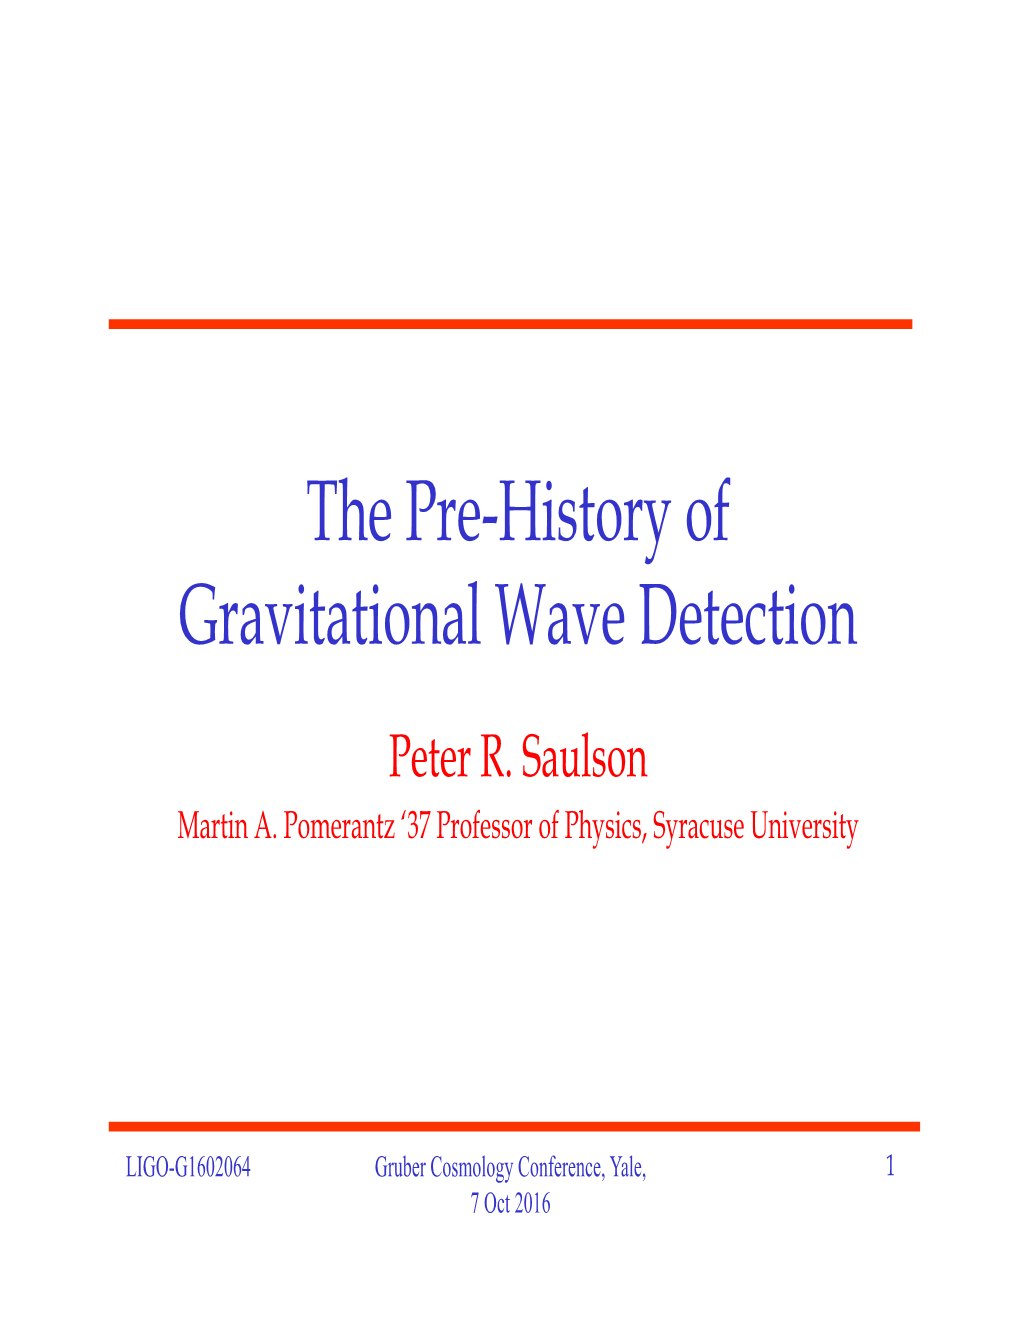 The Pre-History of Gravitational Wave Detection